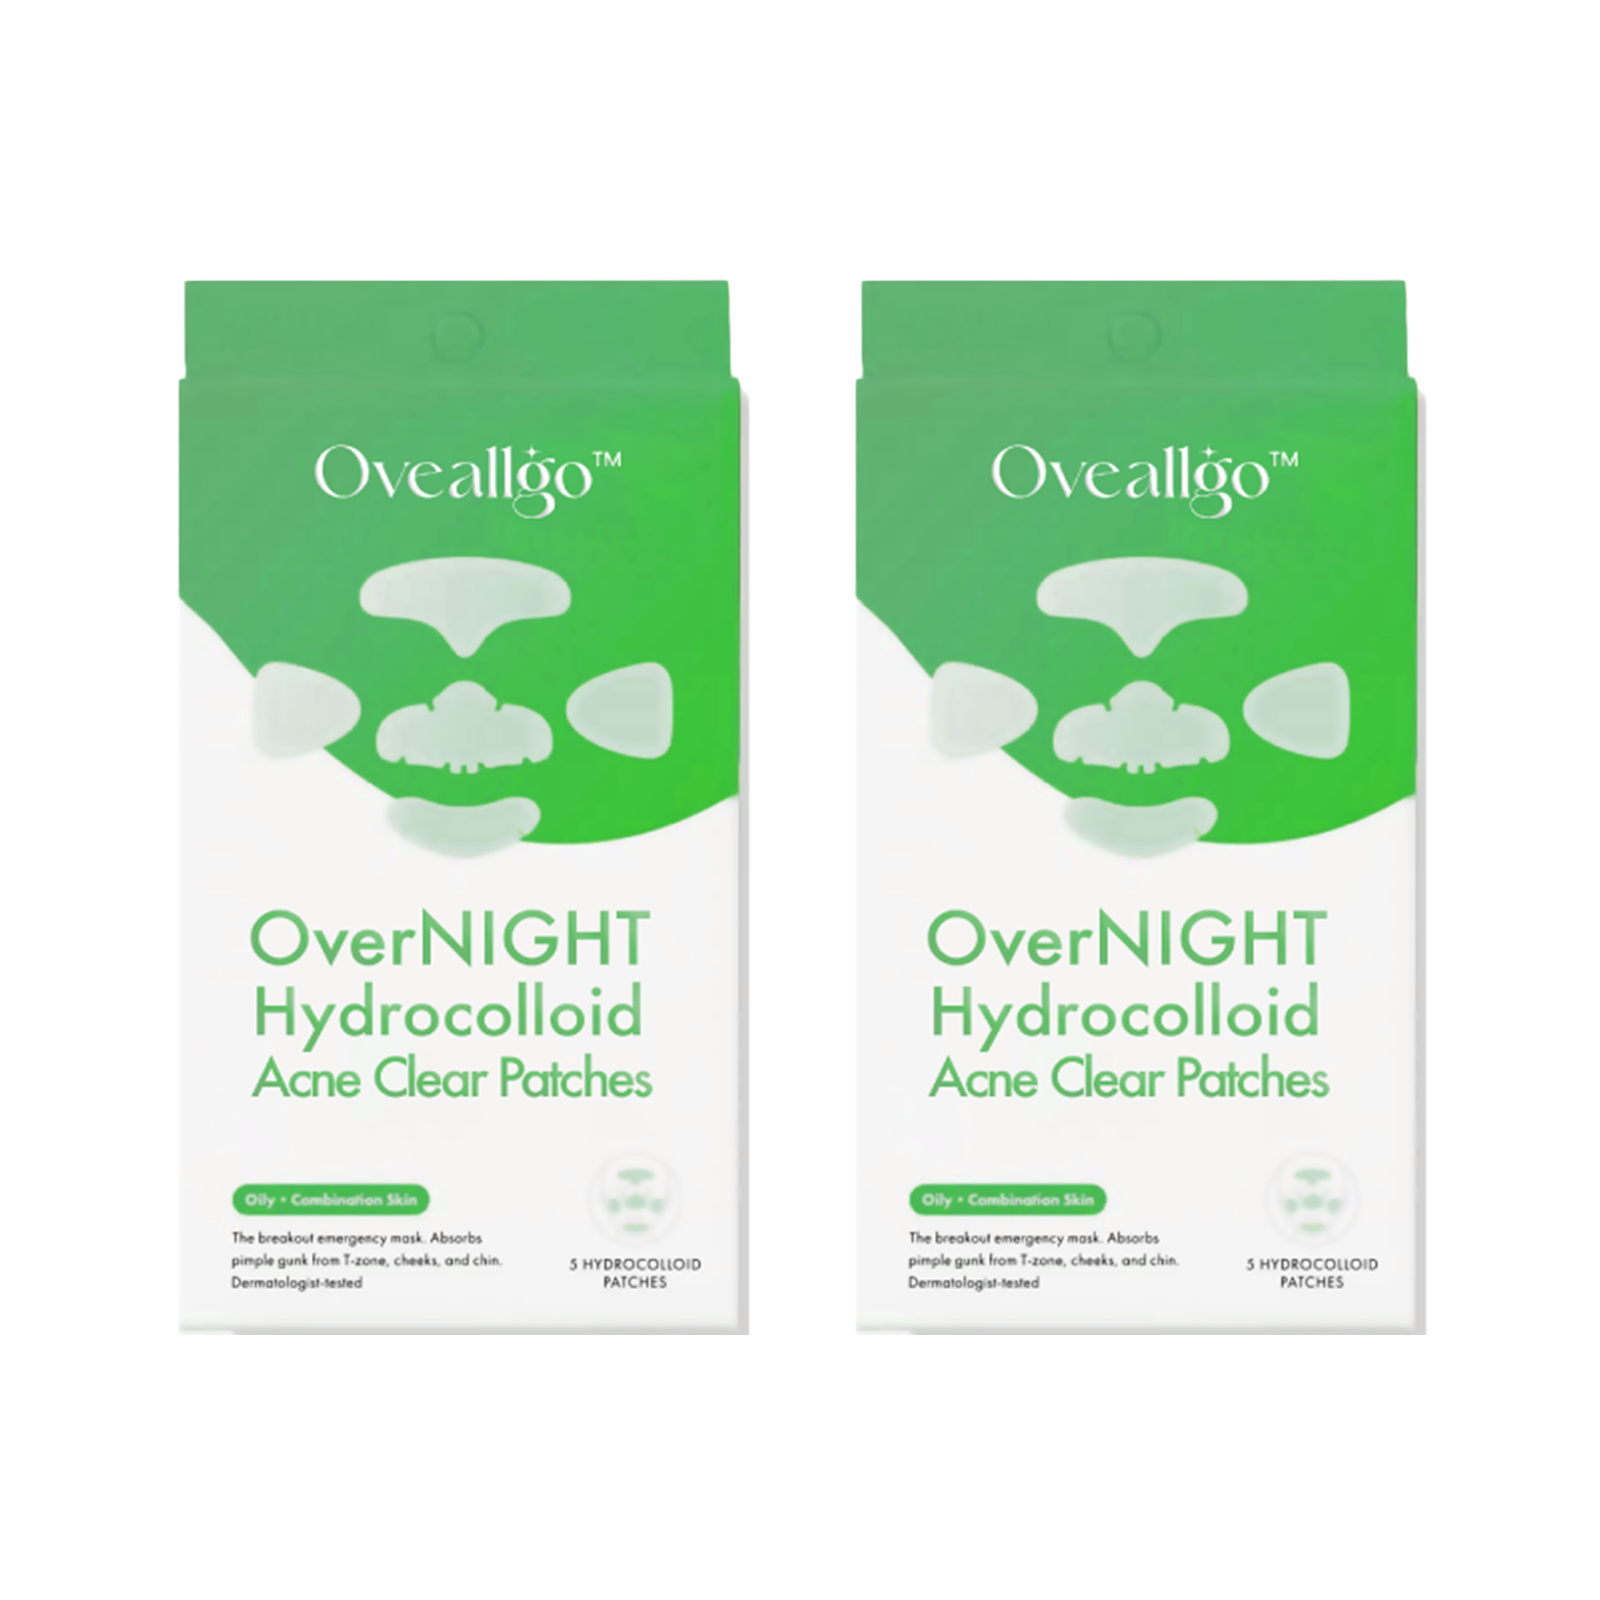 Oveallgo™ Overnight Hydrocolloid Acne Clear Patches